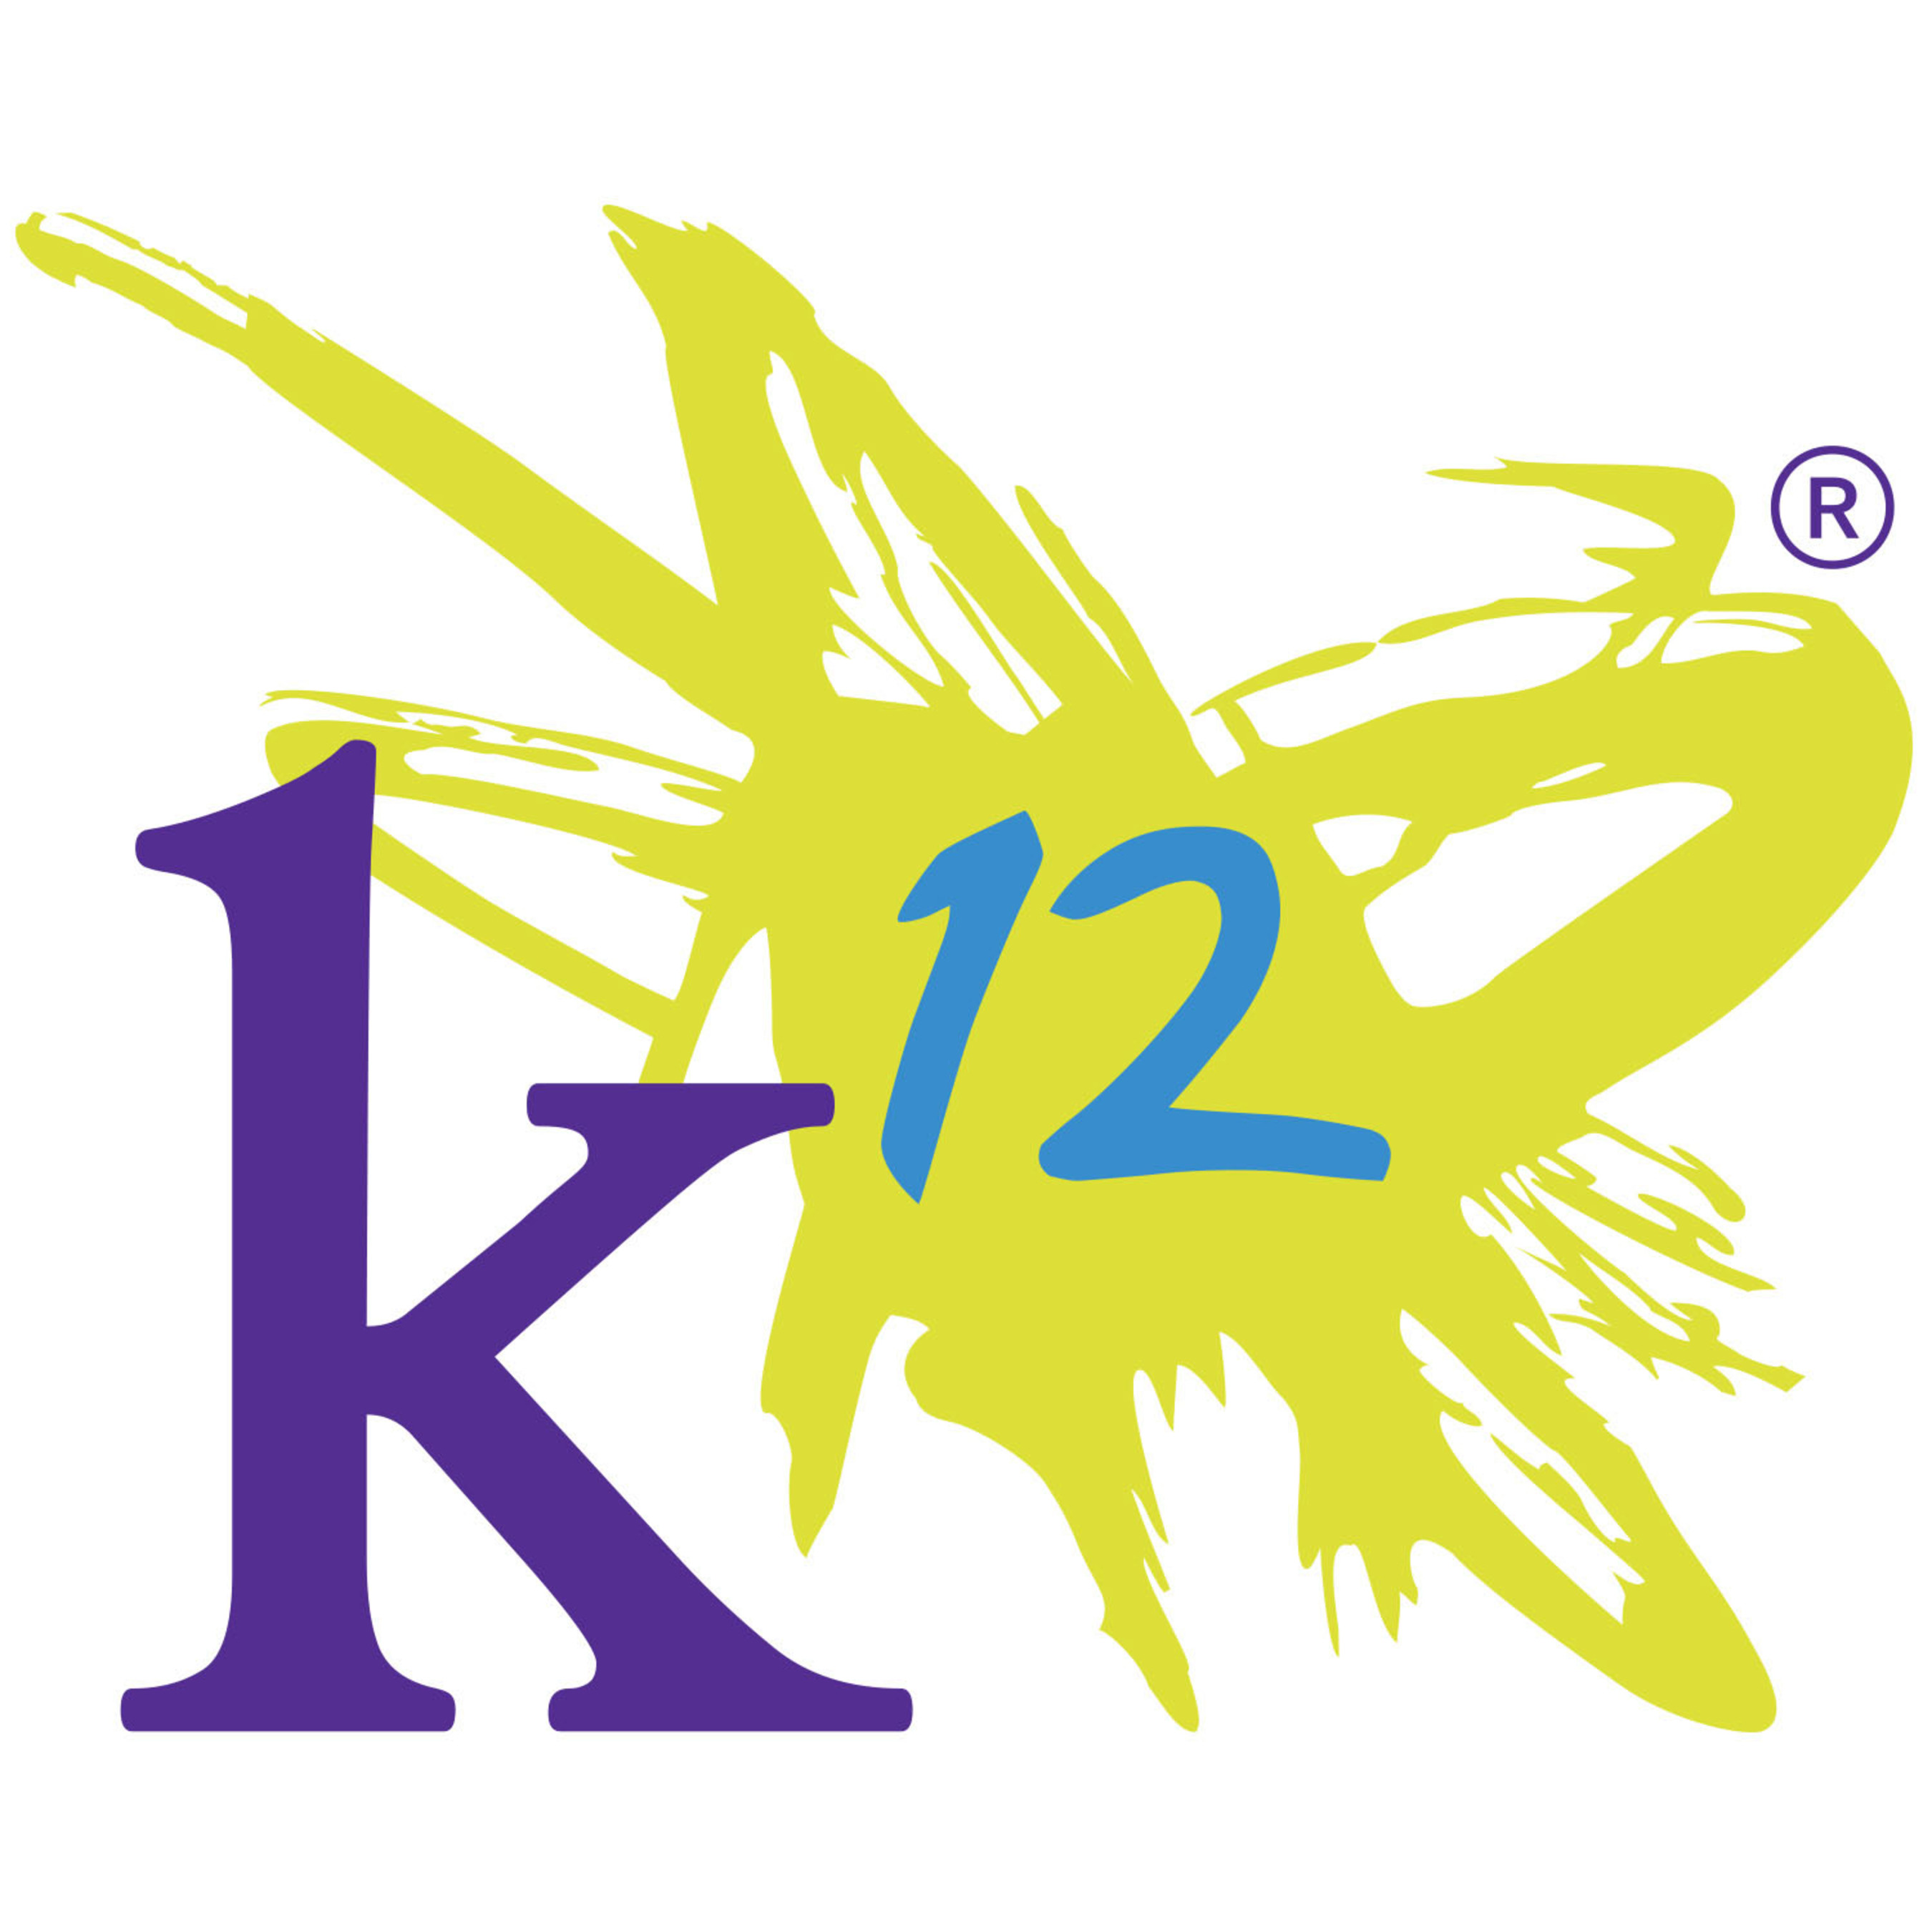 K12 Inc. (NYSE: LRN) is driving innovation and advancing the quality of education by delivering state-of-the-art, digital learning platforms and technology to students and school districts across the globe. With nearly a half-billion dollars invested in developing award winning curriculum, K12 serves over 2,000 schools and school districts and has delivered more than four million courses over the past decade. K12 is a company of educators with the nation's largest network of K-12 online school teachers, providing instruction, academic services, and learning solutions to public schools and districts, traditional classrooms, blended school programs, and directly to families. (PRNewsFoto/K12 Inc.) (PRNewsFoto/)